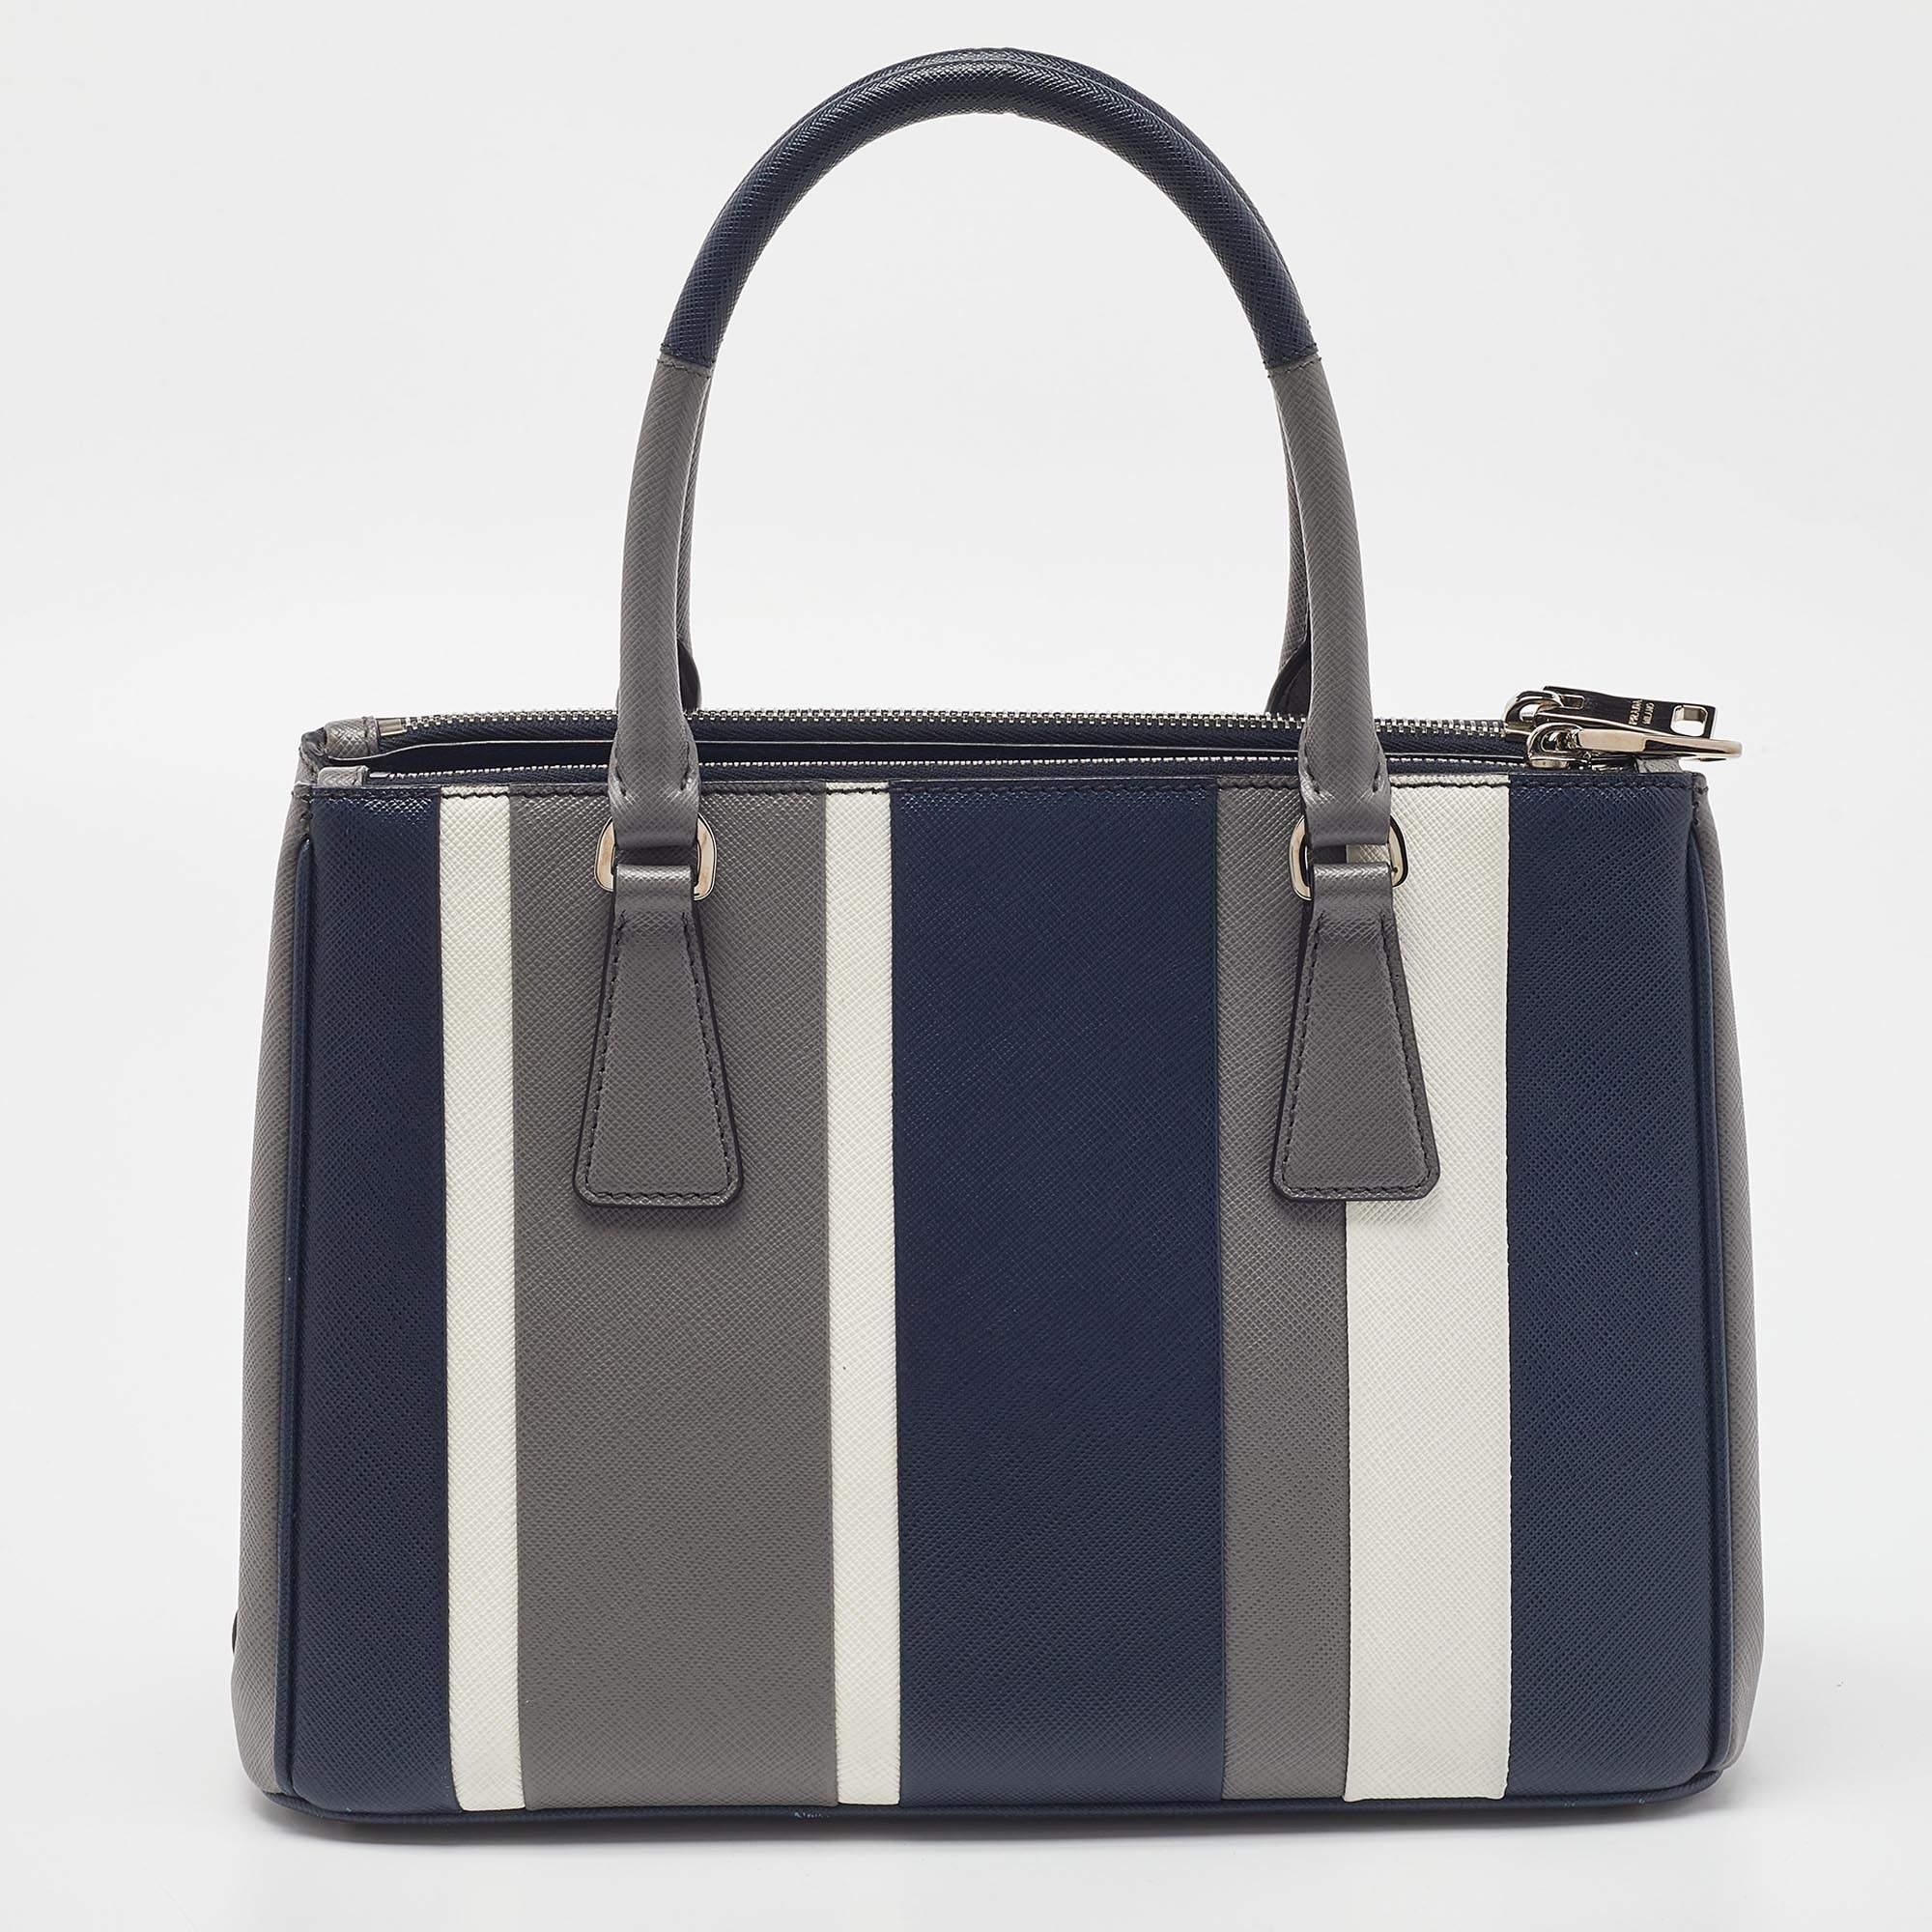 This Double Zip tote by Prada will be a loved addition to your closet. It has been crafted from Saffiano leather and styled with silver-tone hardware and tricolor. It comes with two top handles, two zip compartments, and a perfectly-sized main